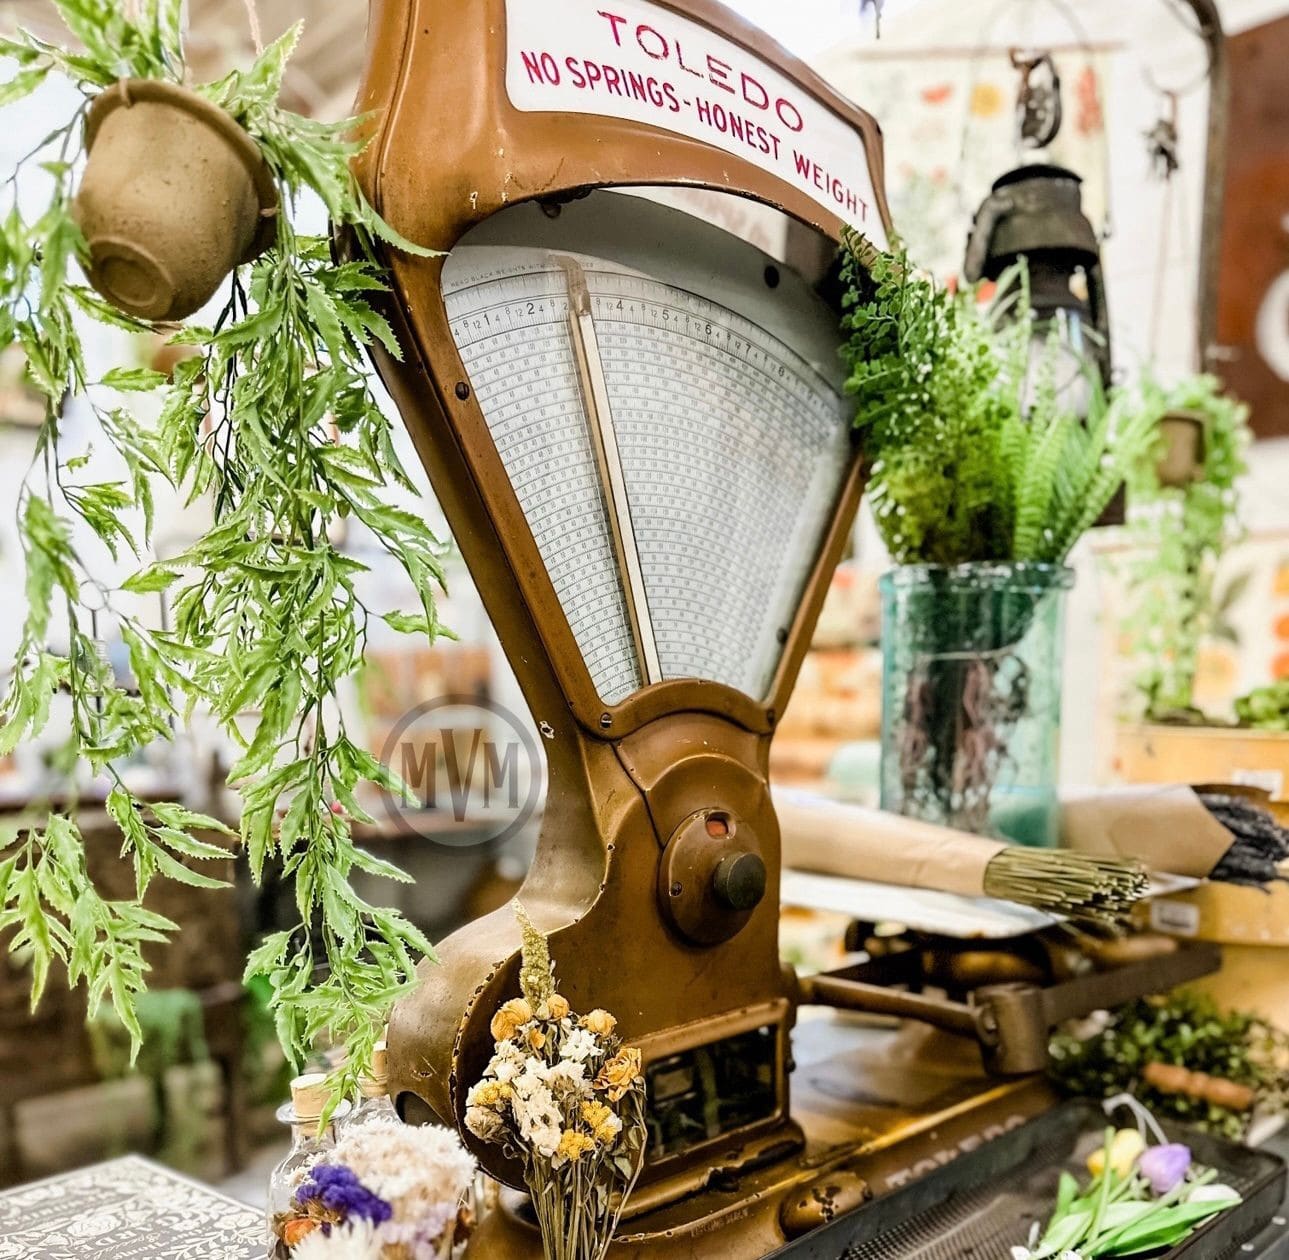 Amazing antique Toledo scale paired beautifully with garden decor andother vintage accents at a The Modern Vintage Market vendor booth